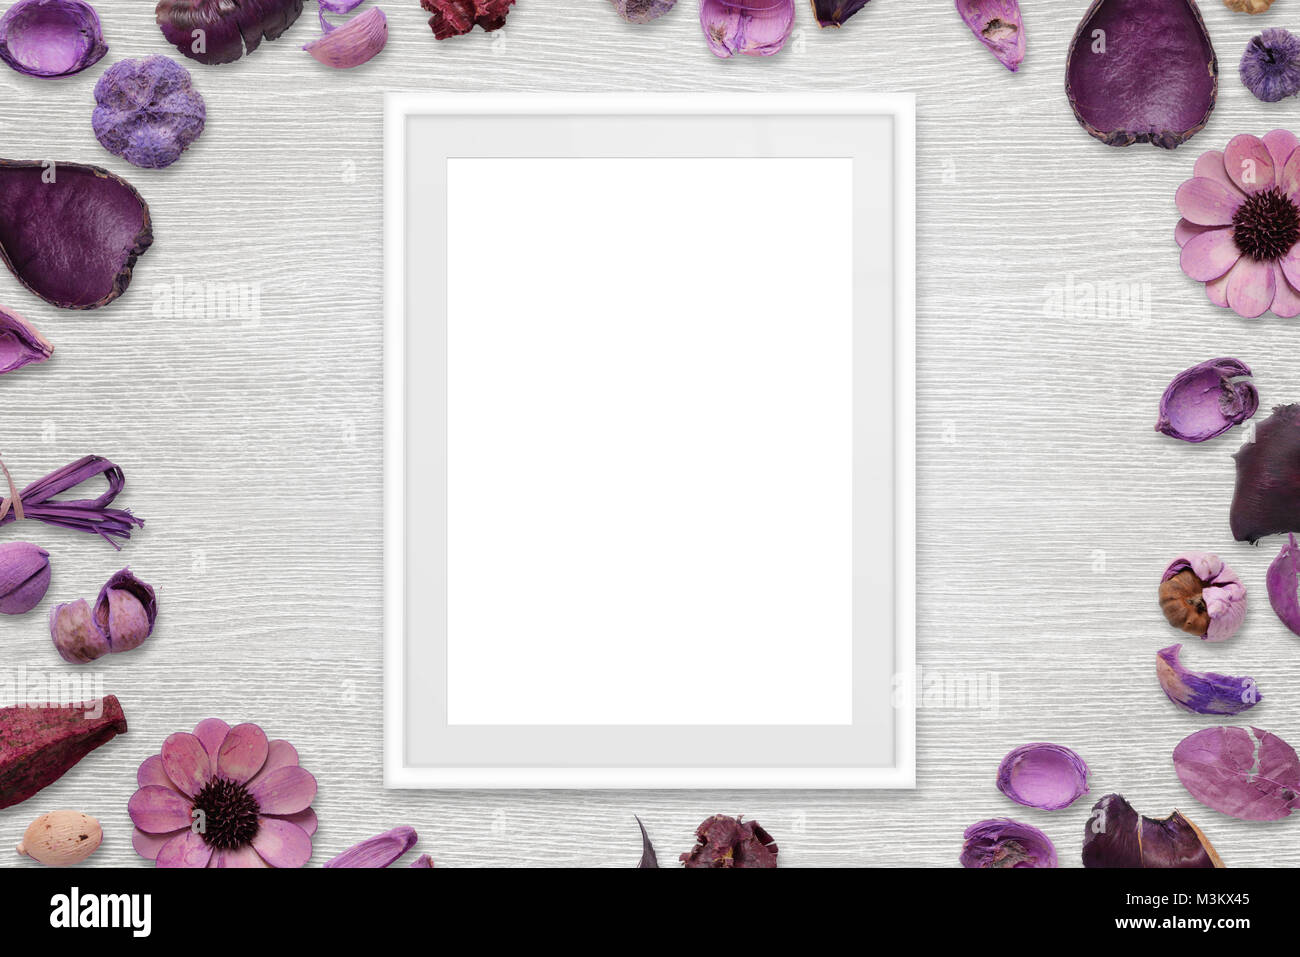 Picture frame with isolated white space for picture or text. Flower decorations around the frame. White wooden desk in background. Top view. Stock Photo